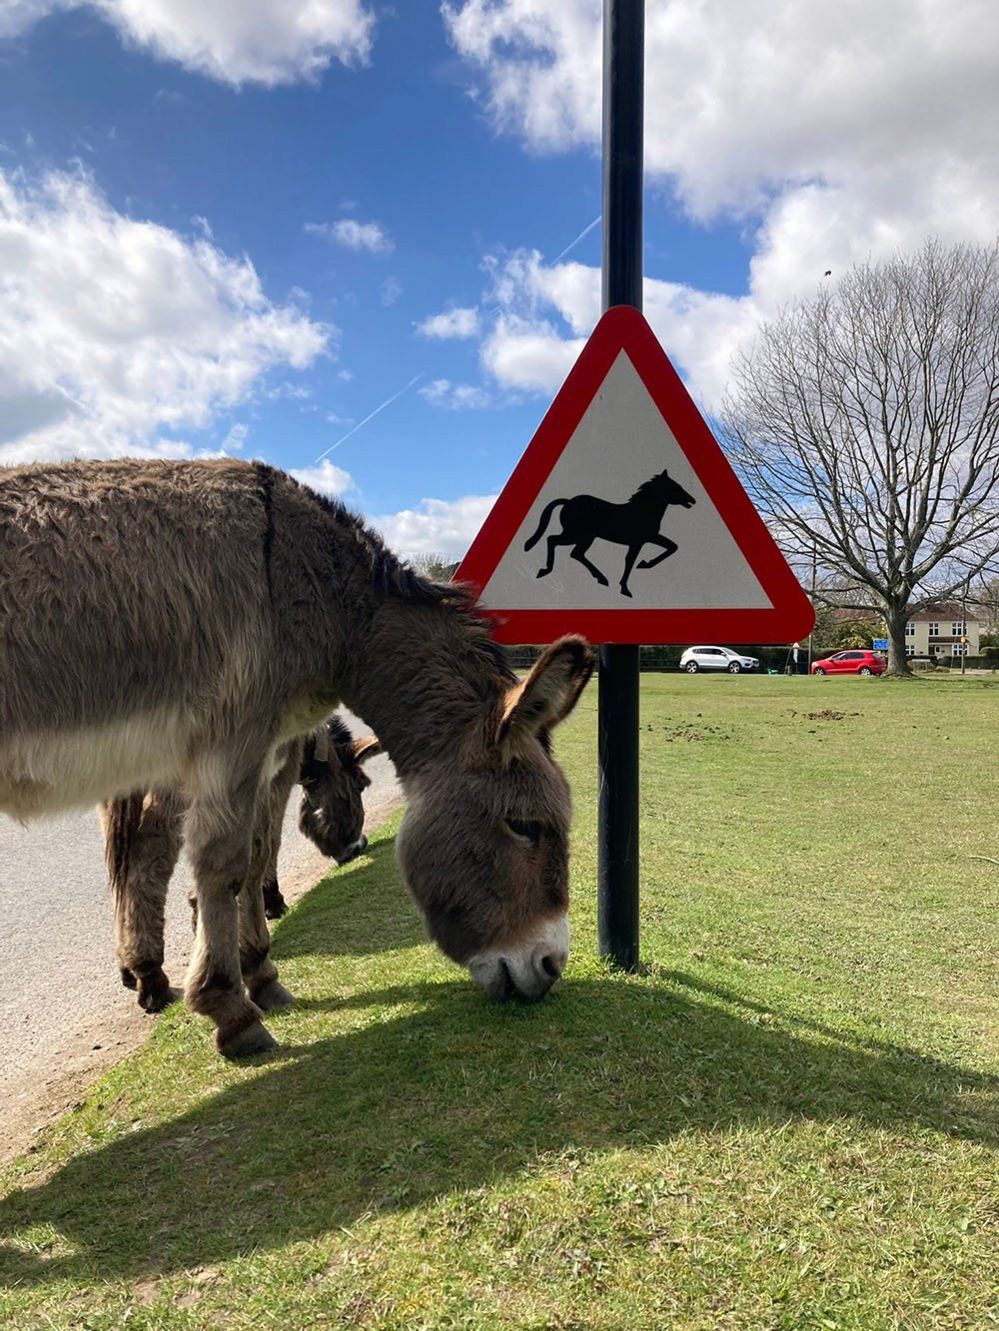 Donkey and a sign